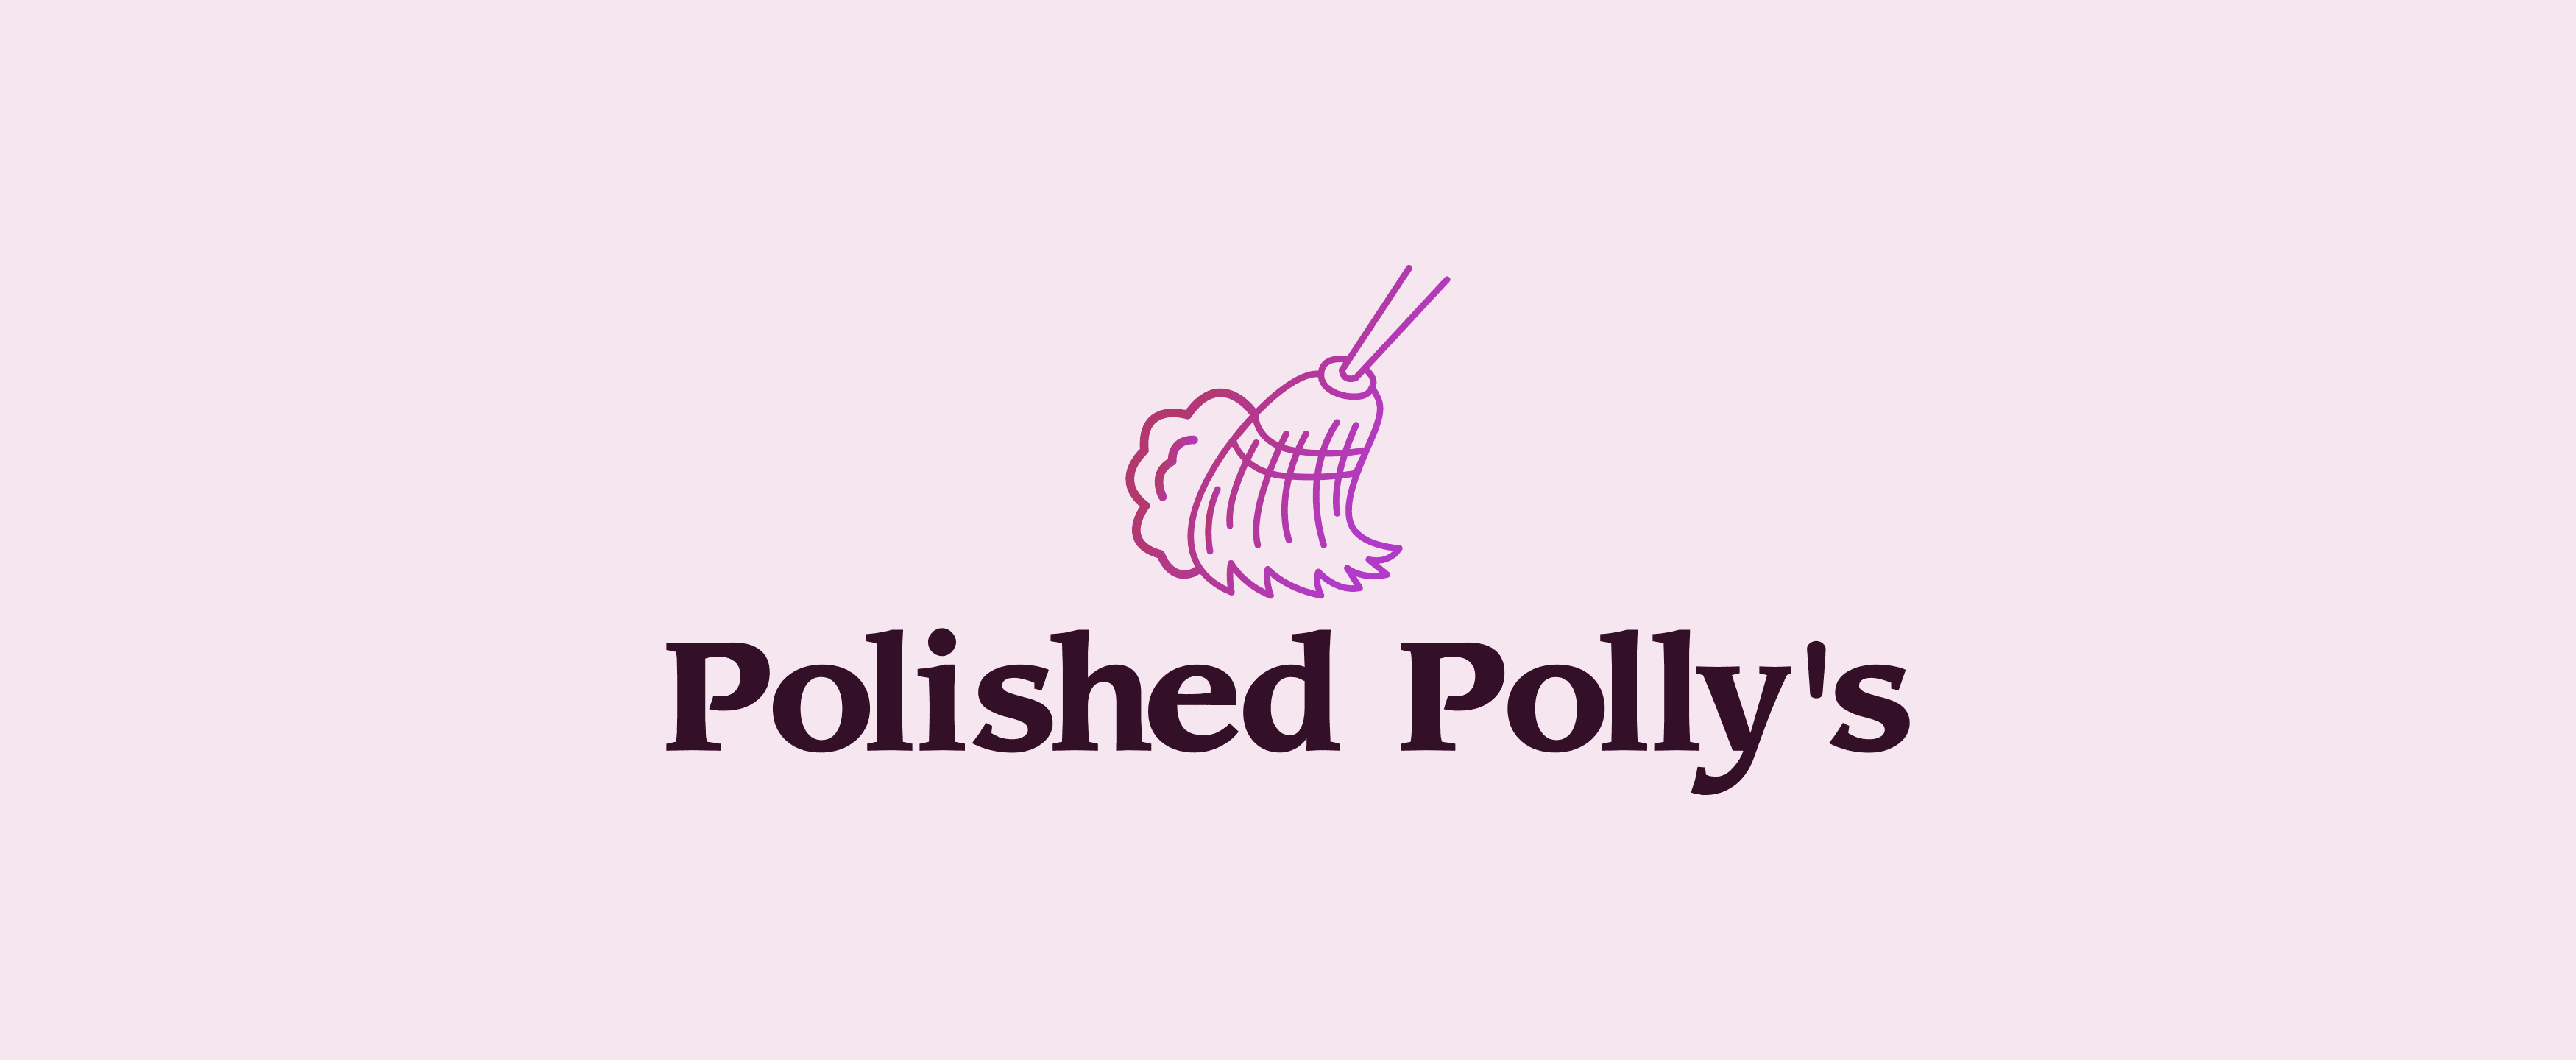 Polished Polly’s